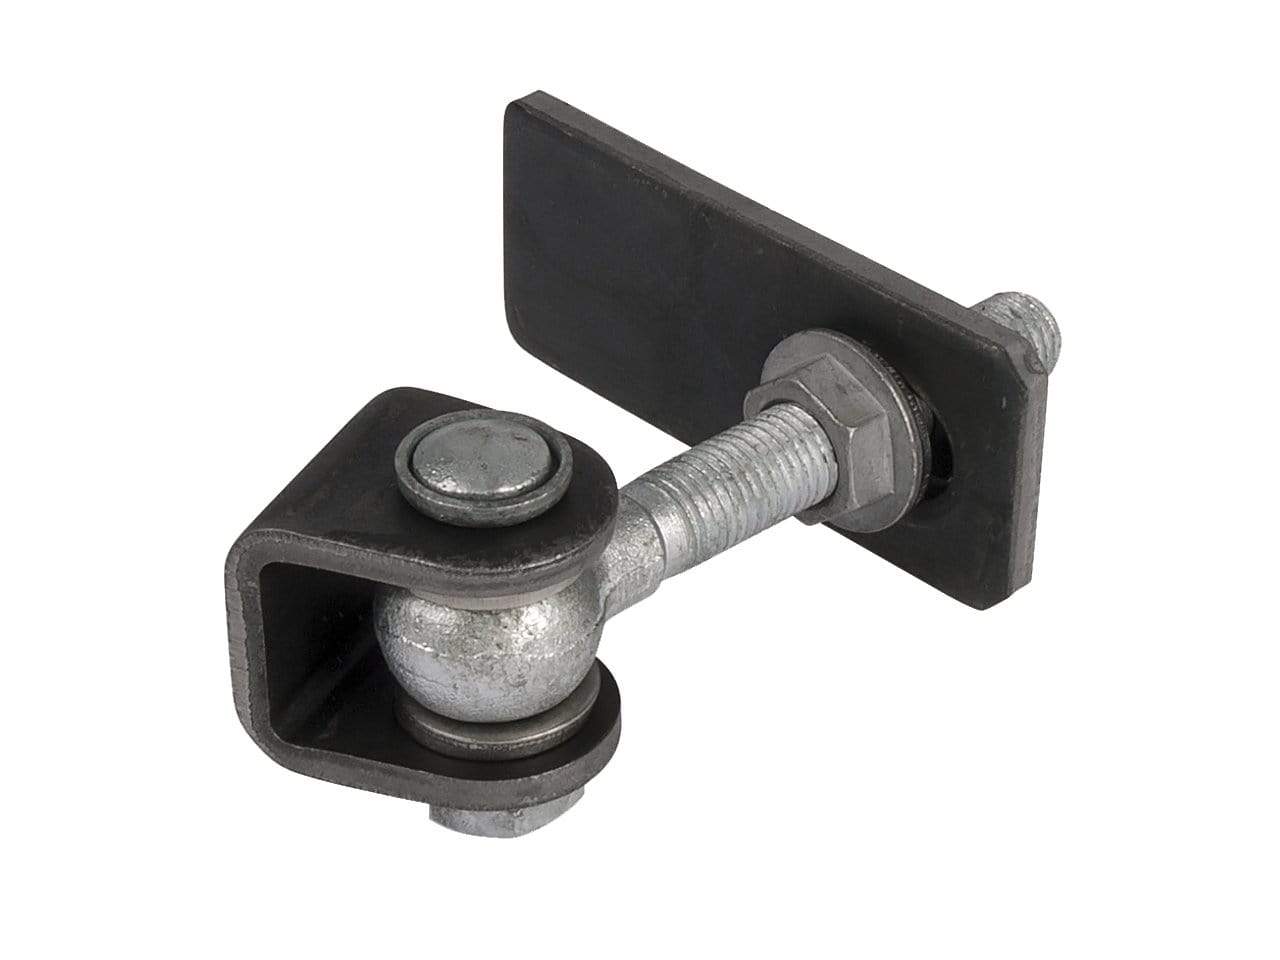 180° 3-Way Adjustable Gate Hinge - Weld-on - For Gates up to 440 lbs - Multiple Finishes Available - 2 Pack